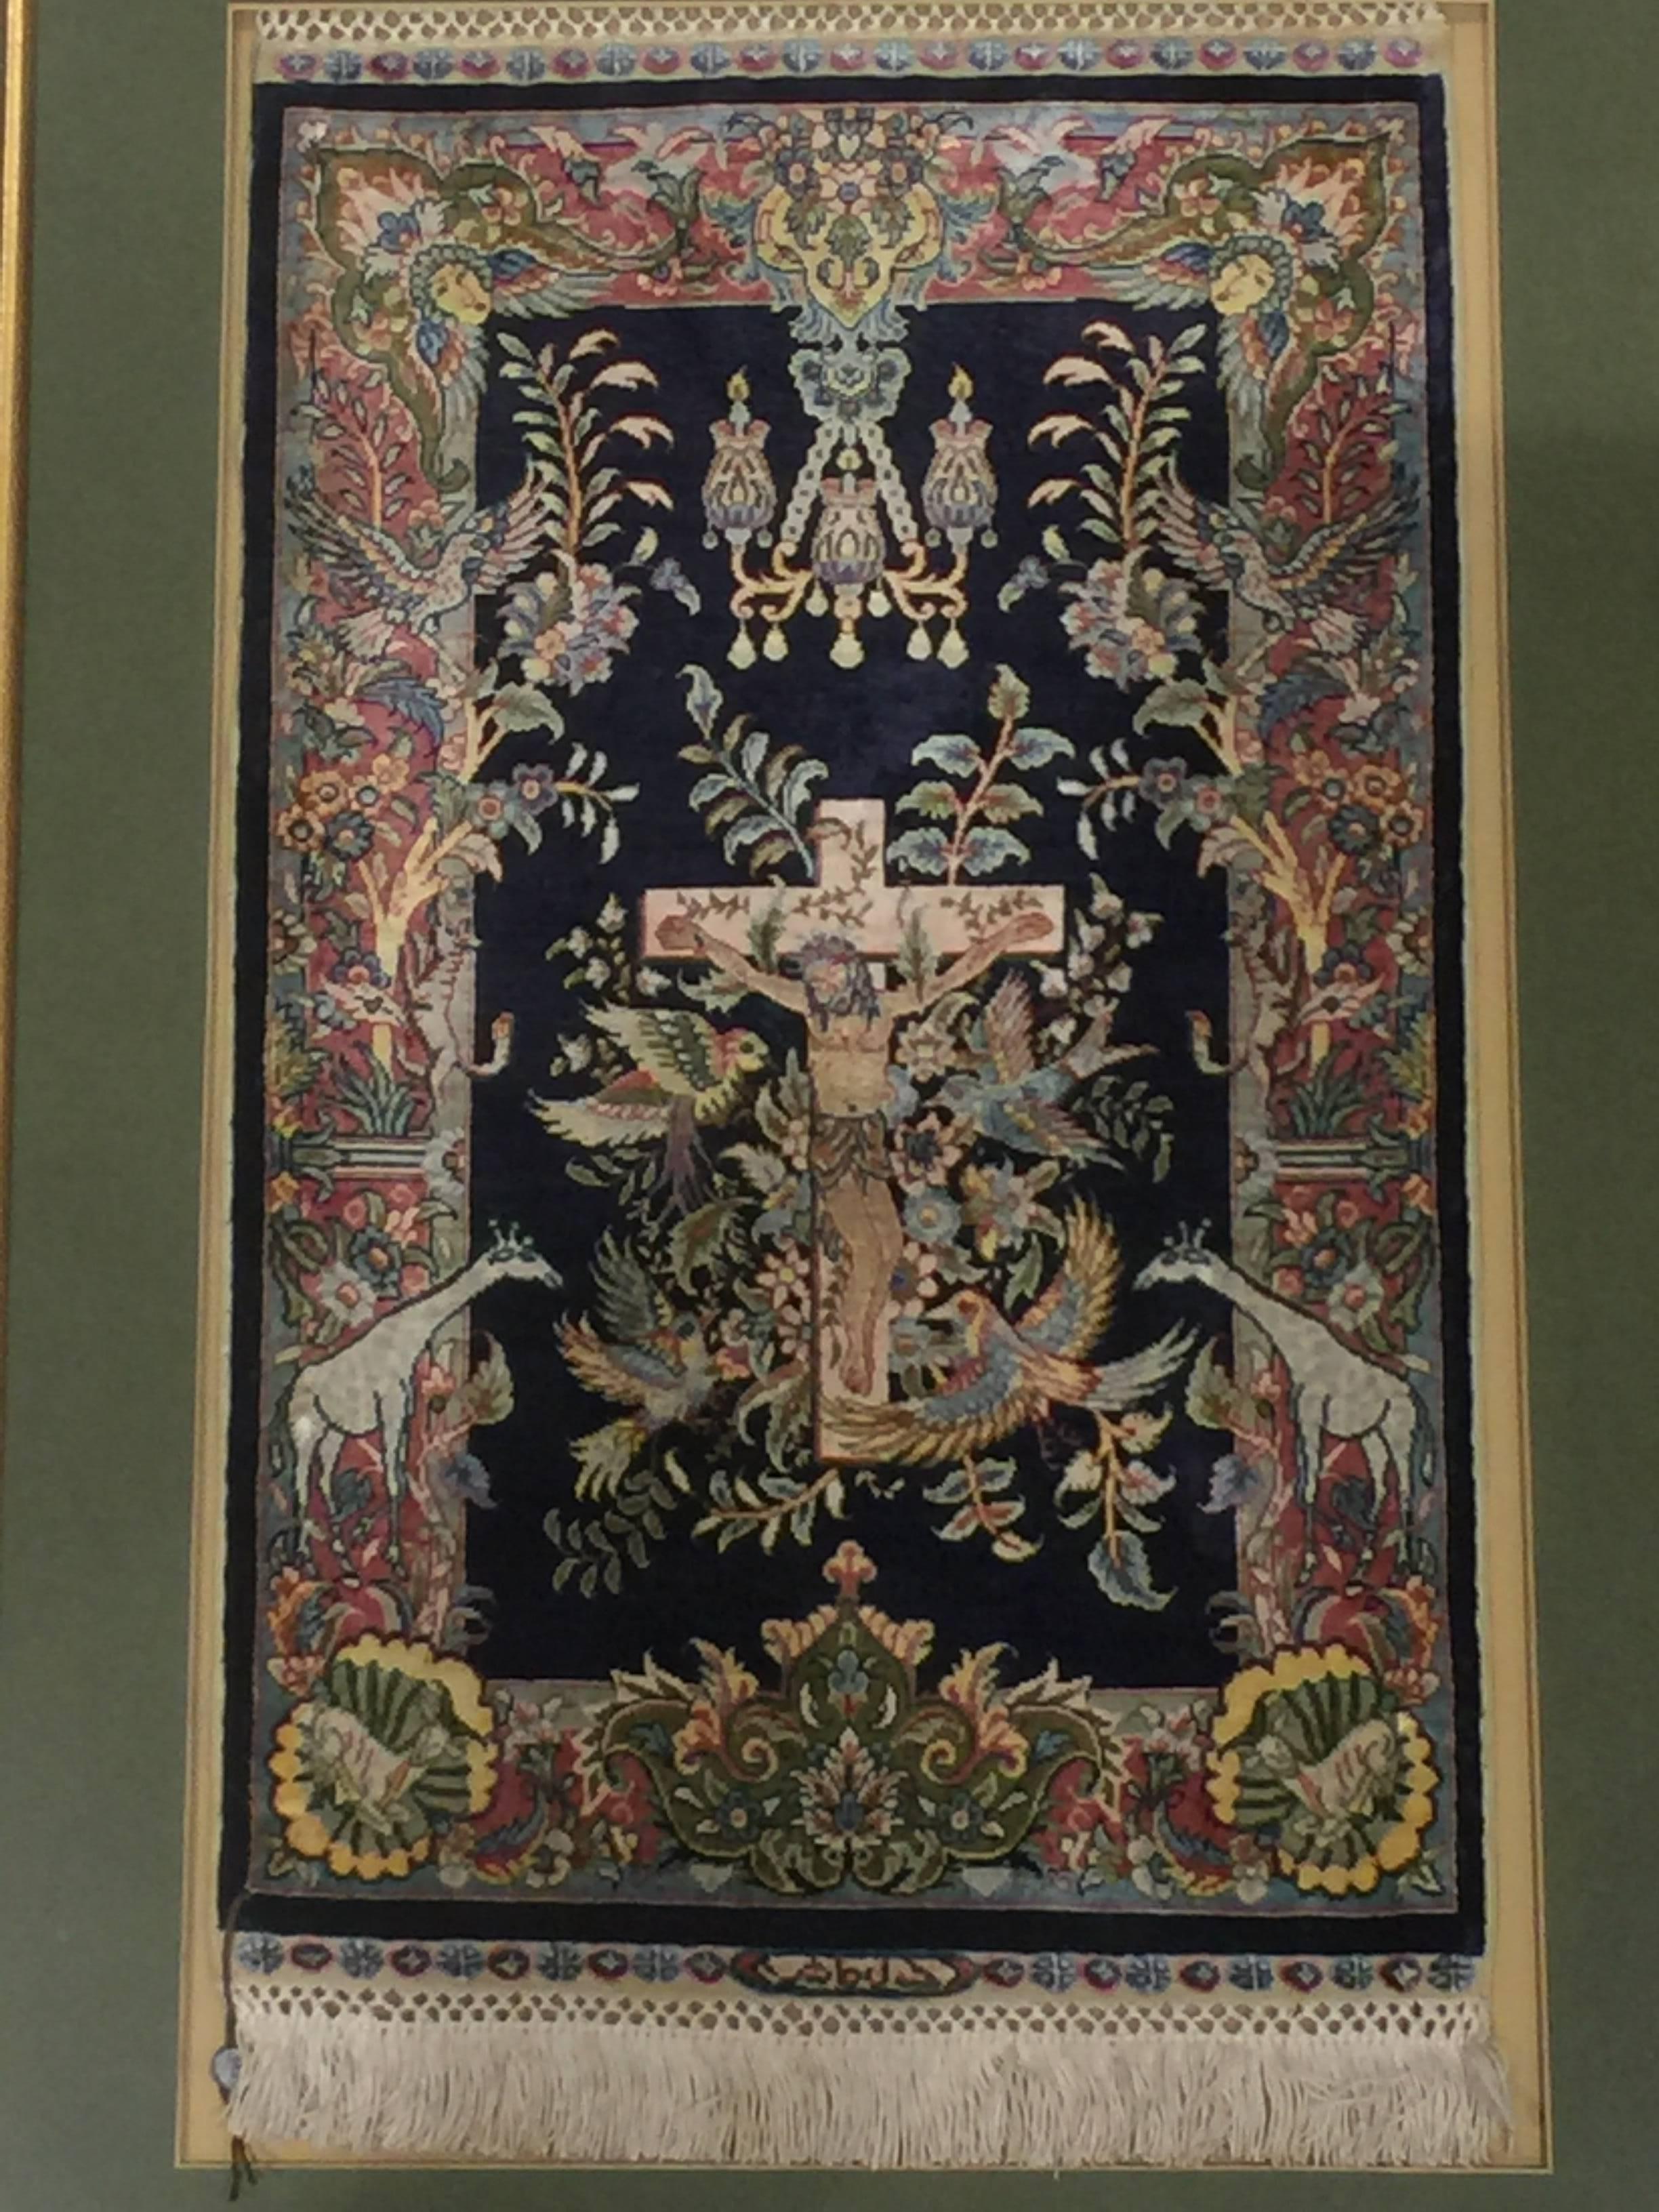 Turkish Hereke pure silk hand-knotted carpet, very fine quality, measures 15 x 15 knots each centimetre.
It features various animals (lamb, birds, giraffe, etc.) and floral motifs with a central depiction of the crucified Jesus Christ.

Hereke